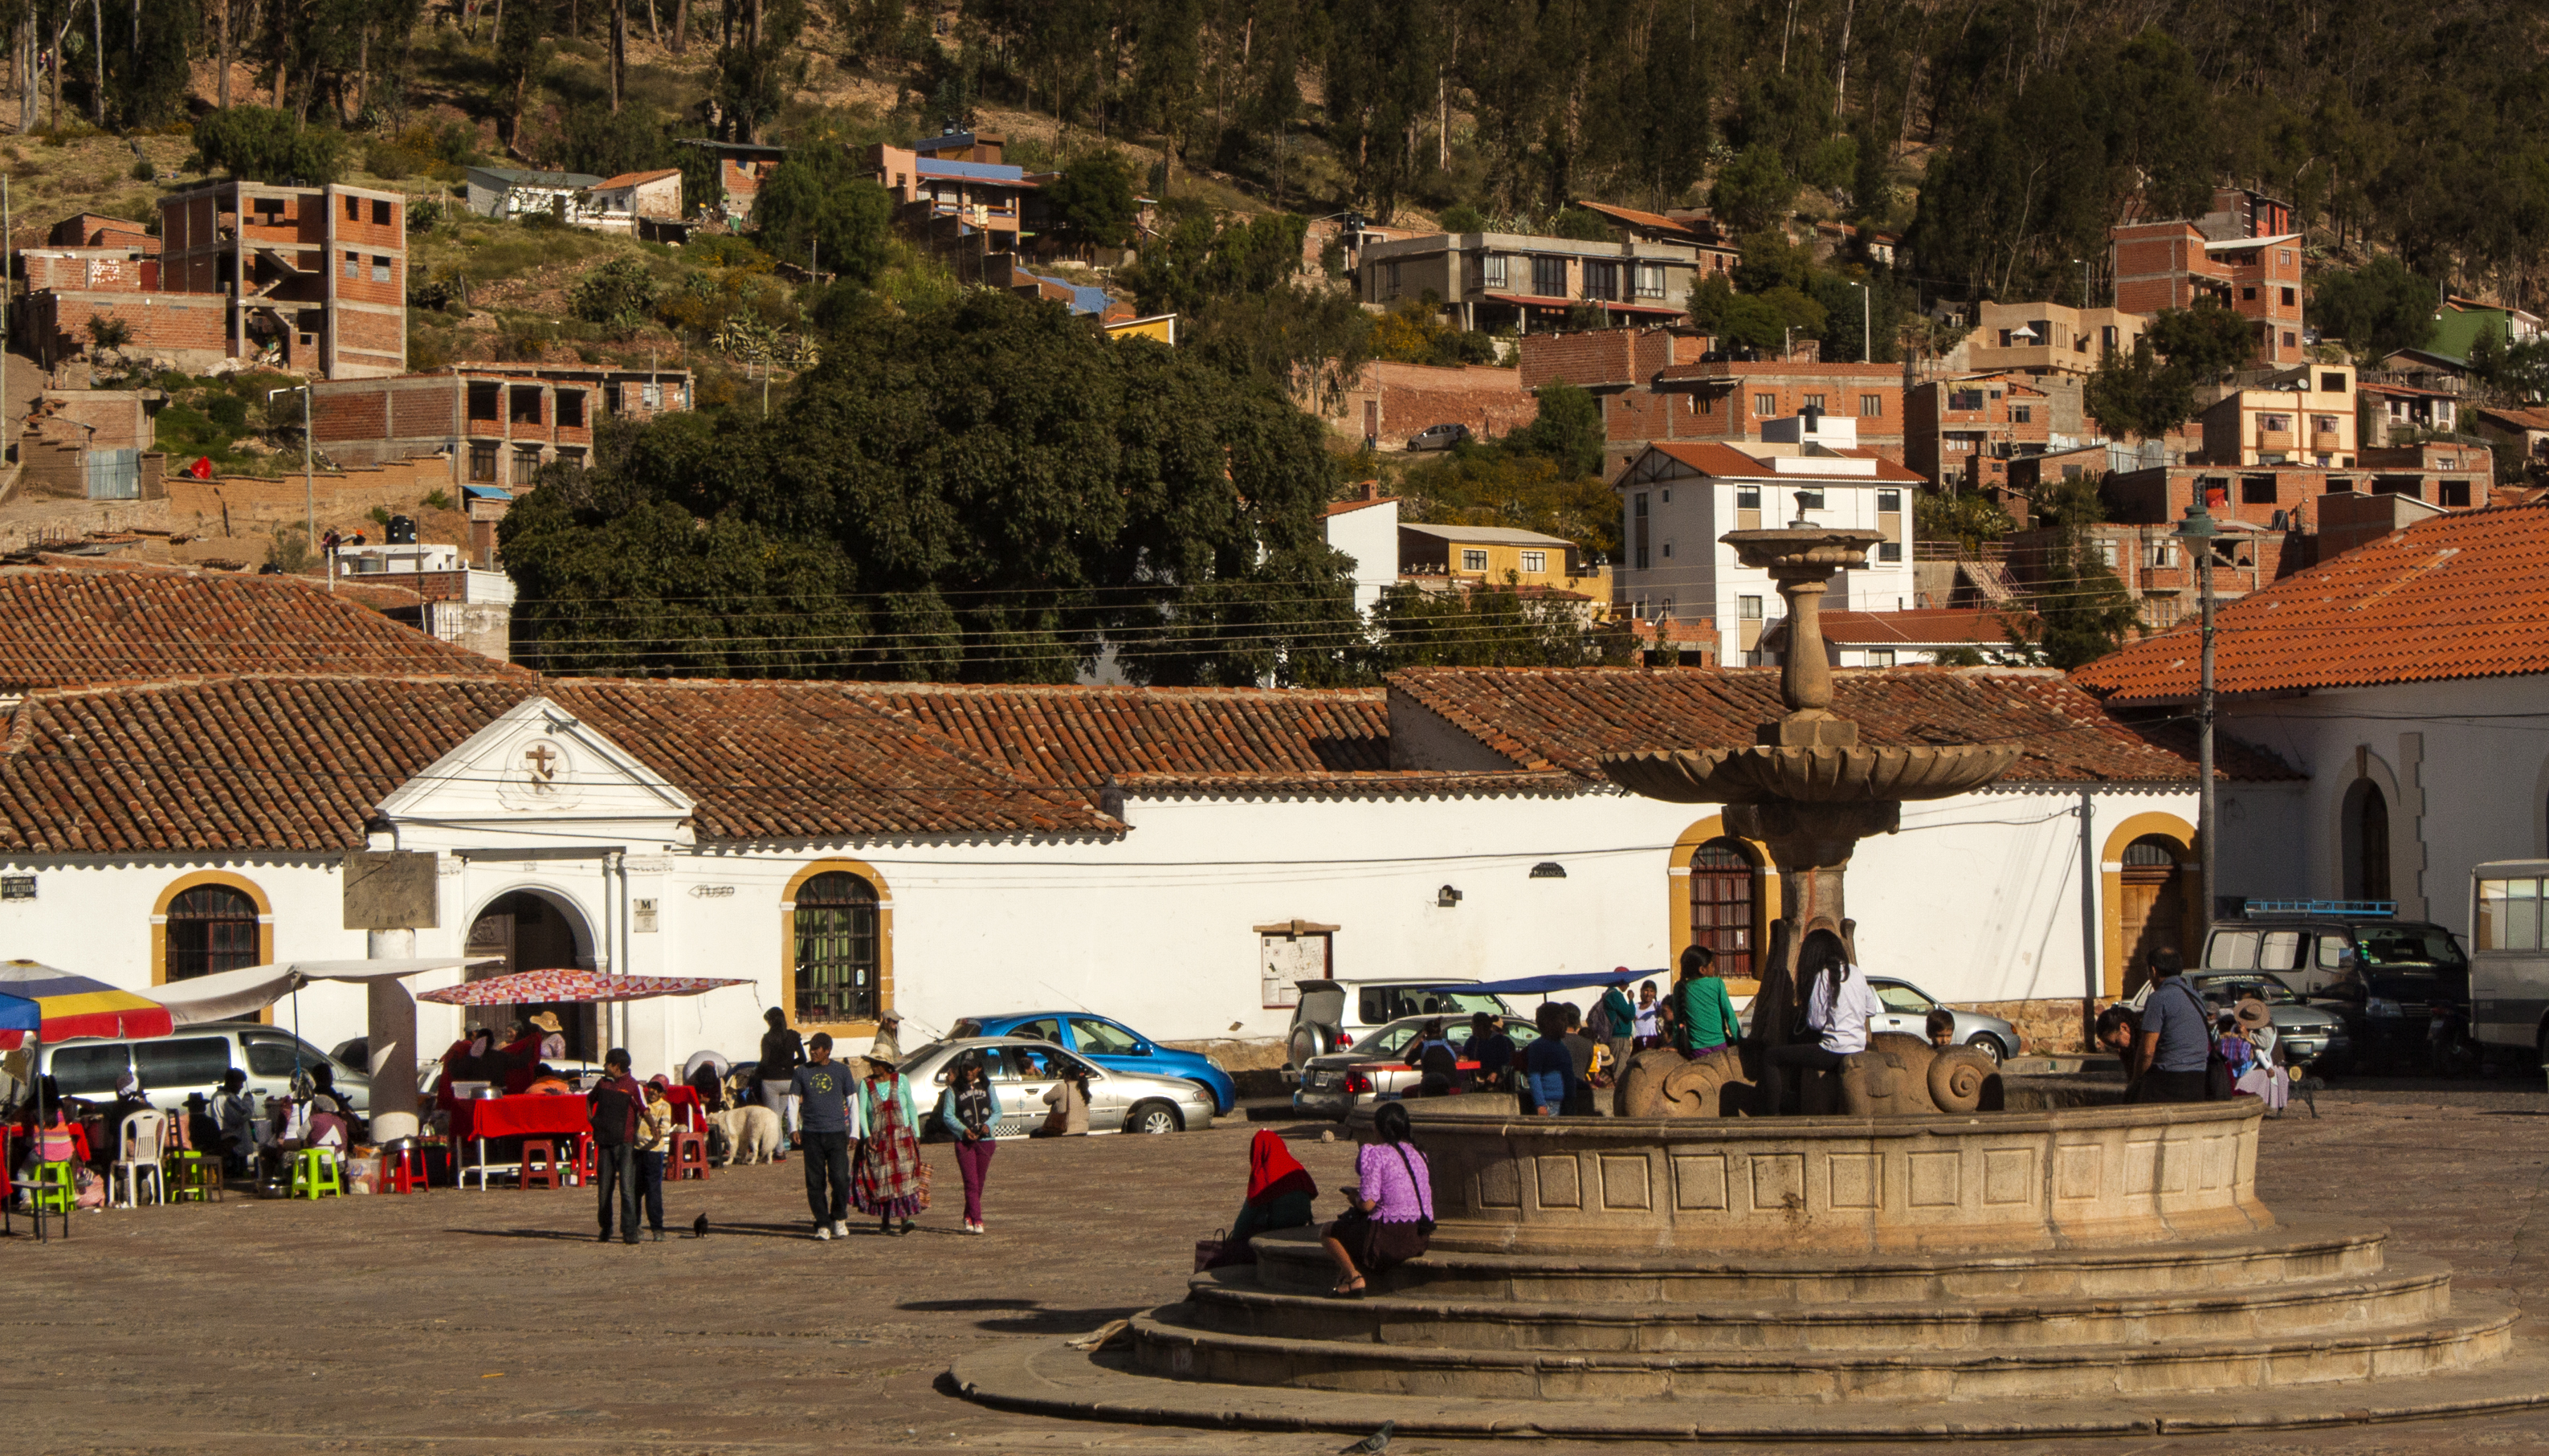 Great-grandfather relocates in Sucre